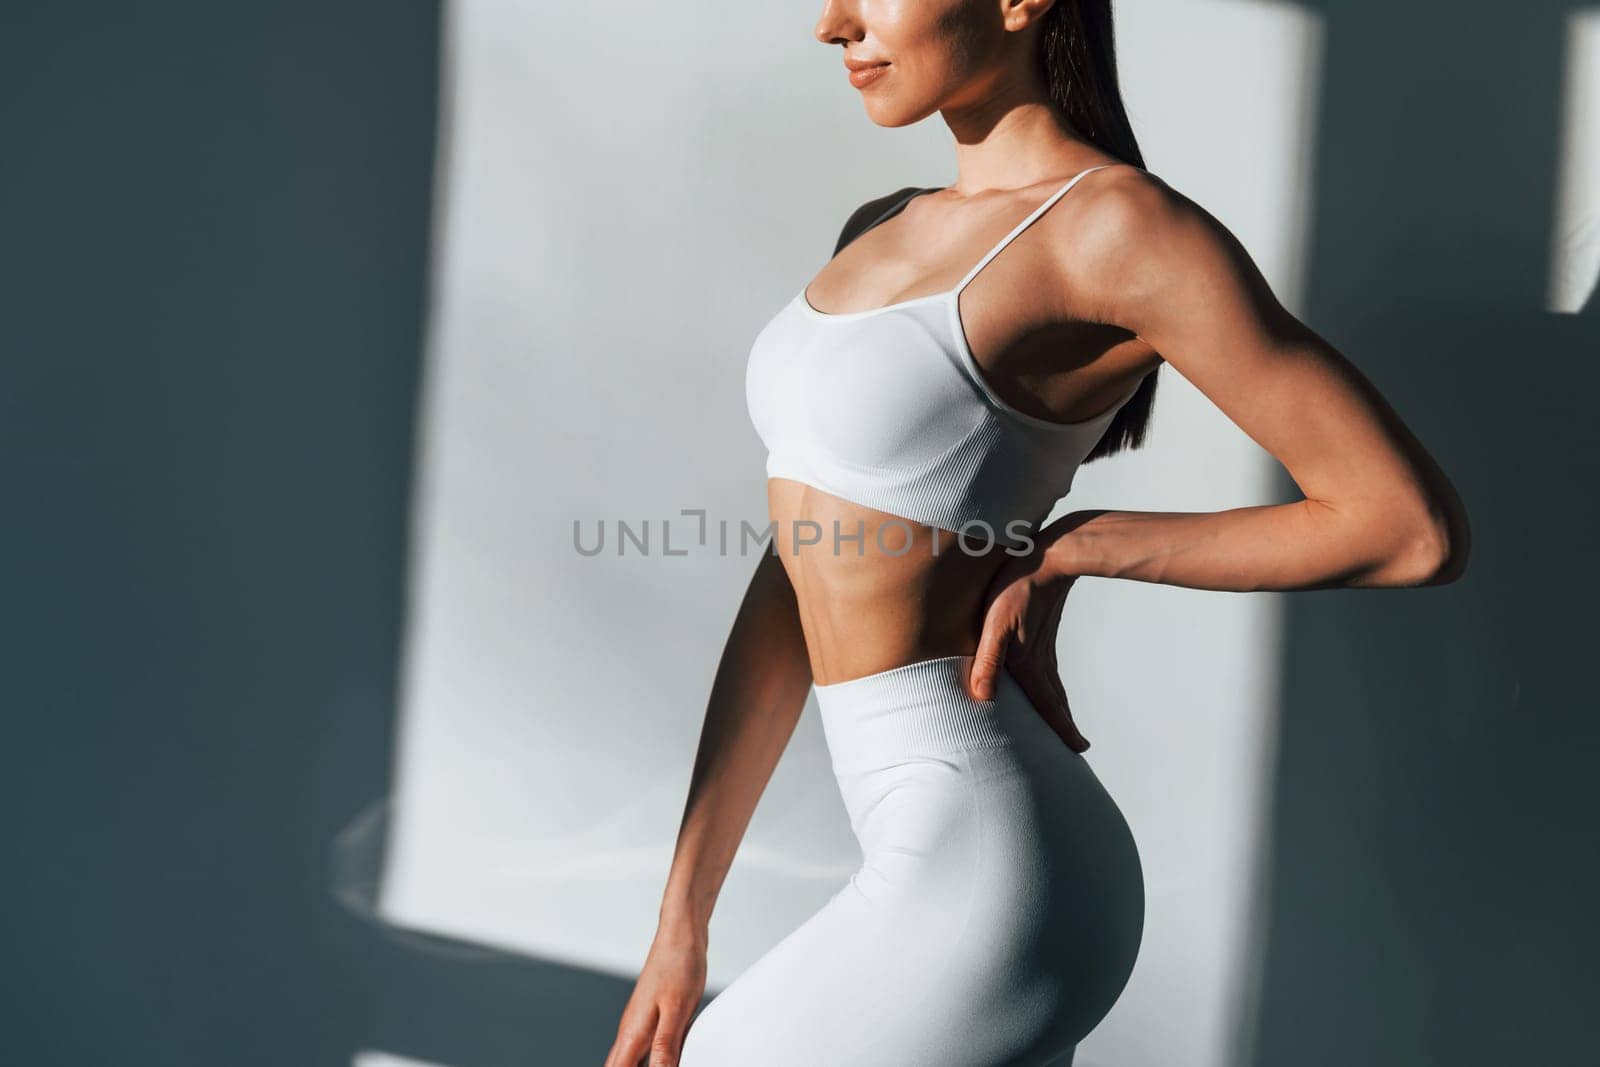 In white sportive clothes. Young caucasian woman with slim body shape is indoors at daytime.